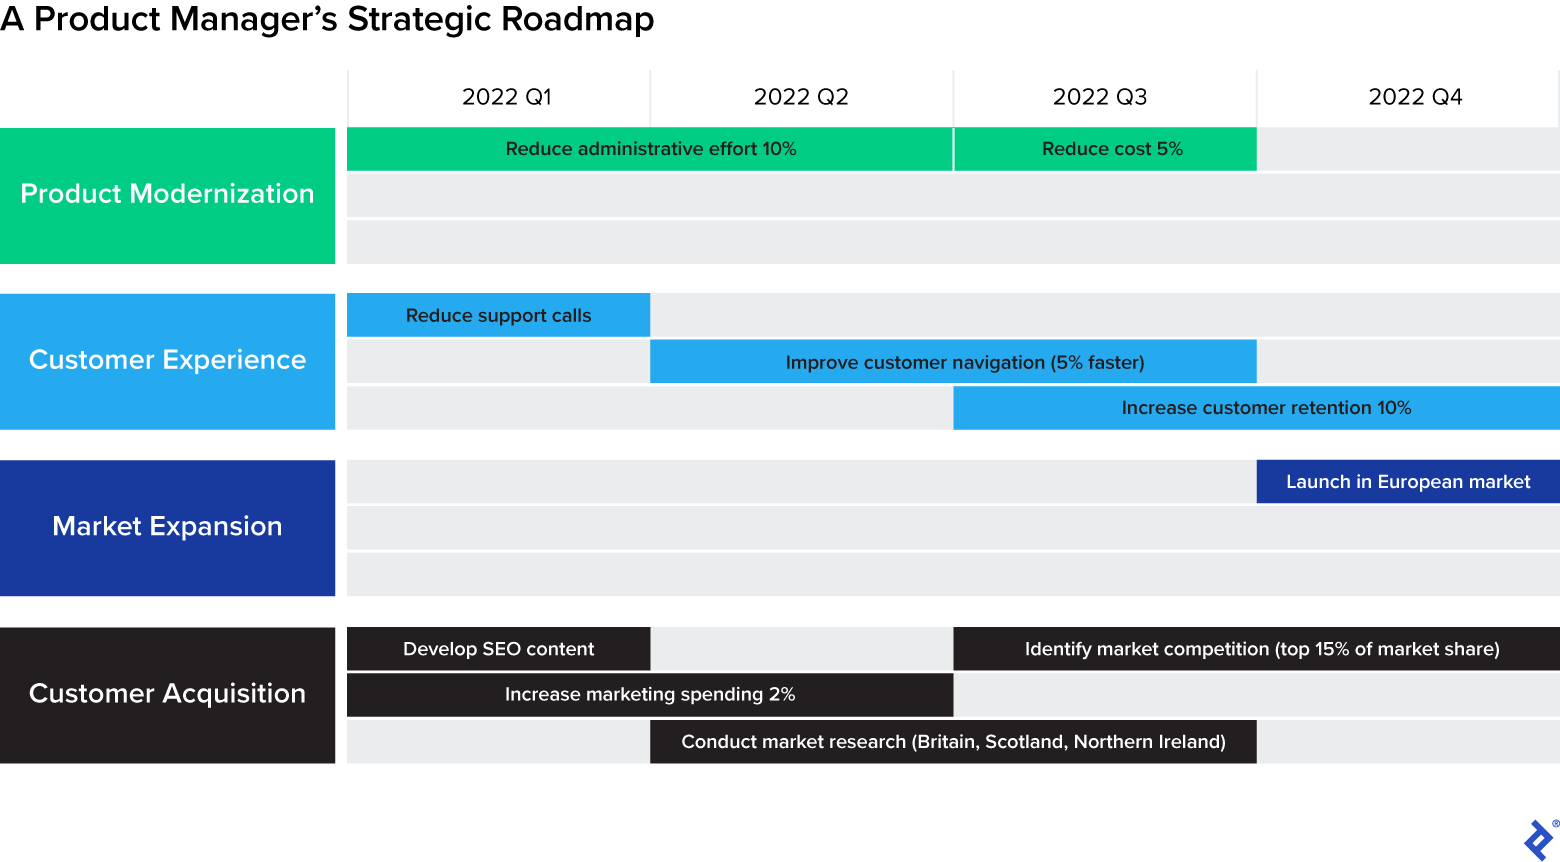 An illustration of a product roadmap, titled, “A Product Manager’s Strategic Roadmap.” There are four rows, labeled “Product Modernization,” “Customer Experience,” “Market Expansion,” and “Customer Acquisition.” Each row is divided into three sub-rows, and accompanied by four column labels, “2022 Q1,” “2022 Q2,” “2022 Q3,” and “2022 Q4.” In the first sub-row of Product Modernization are two boxes. One labeled “Reduce administrative effort 10%” crosses 2022 Q1 and 2022 Q2, and one labeled “Reduce cost 5%” is on 2022 Q3. In the first sub-row of Customer Experience, a box labeled “Reduce support calls” is on 2022 Q1. In the second sub-row, a box labeled “Improve customer navigation (5% faster) crosses 2022 Q2 and 2022 Q3. In the third sub-row, a box labeled “Increase customer retention 10%” crosses 2022 Q3 and 2022 Q4. In the first sub-row of Market Expansion, a box labeled “Launch in European market” is on 2022 Q4. In the first sub-row of Customer Acquisition, a box labeled “Develop SEO content” is on 2022 Q1, and a box labeled “Identify market competition (top 15% of market share)” crosses 2022 Q3 and 2022 Q4. In the second sub-row, a box labeled “Increase marketing spending 2%” crosses 2022 Q1 and 2022 Q2. In the third sub-row, a box labeled “Conduct market research (Britain, Scotland, Northern Ireland)” crosses 2022 Q2 and 2022 Q3.